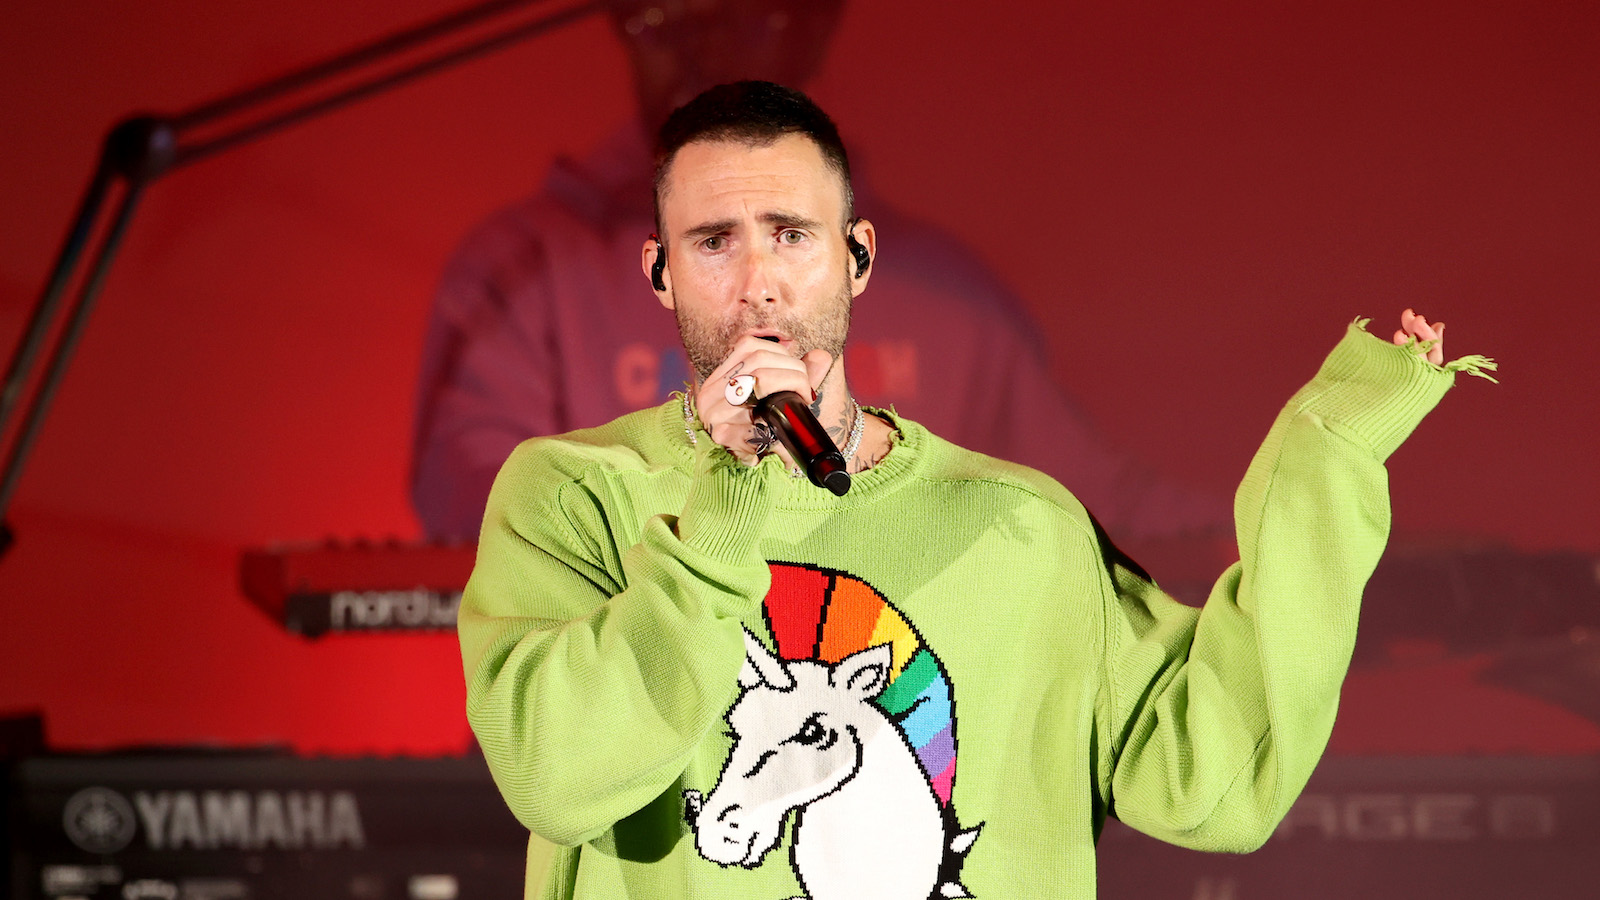 Adam Levine of Maroon 5 wears sweater with unicorn emblem as he performs onstage during the 8th annual "We Can Survive" concert hosted by Audacy at Hollywood Bowl on October 23, 2021 in Los Angeles, California.